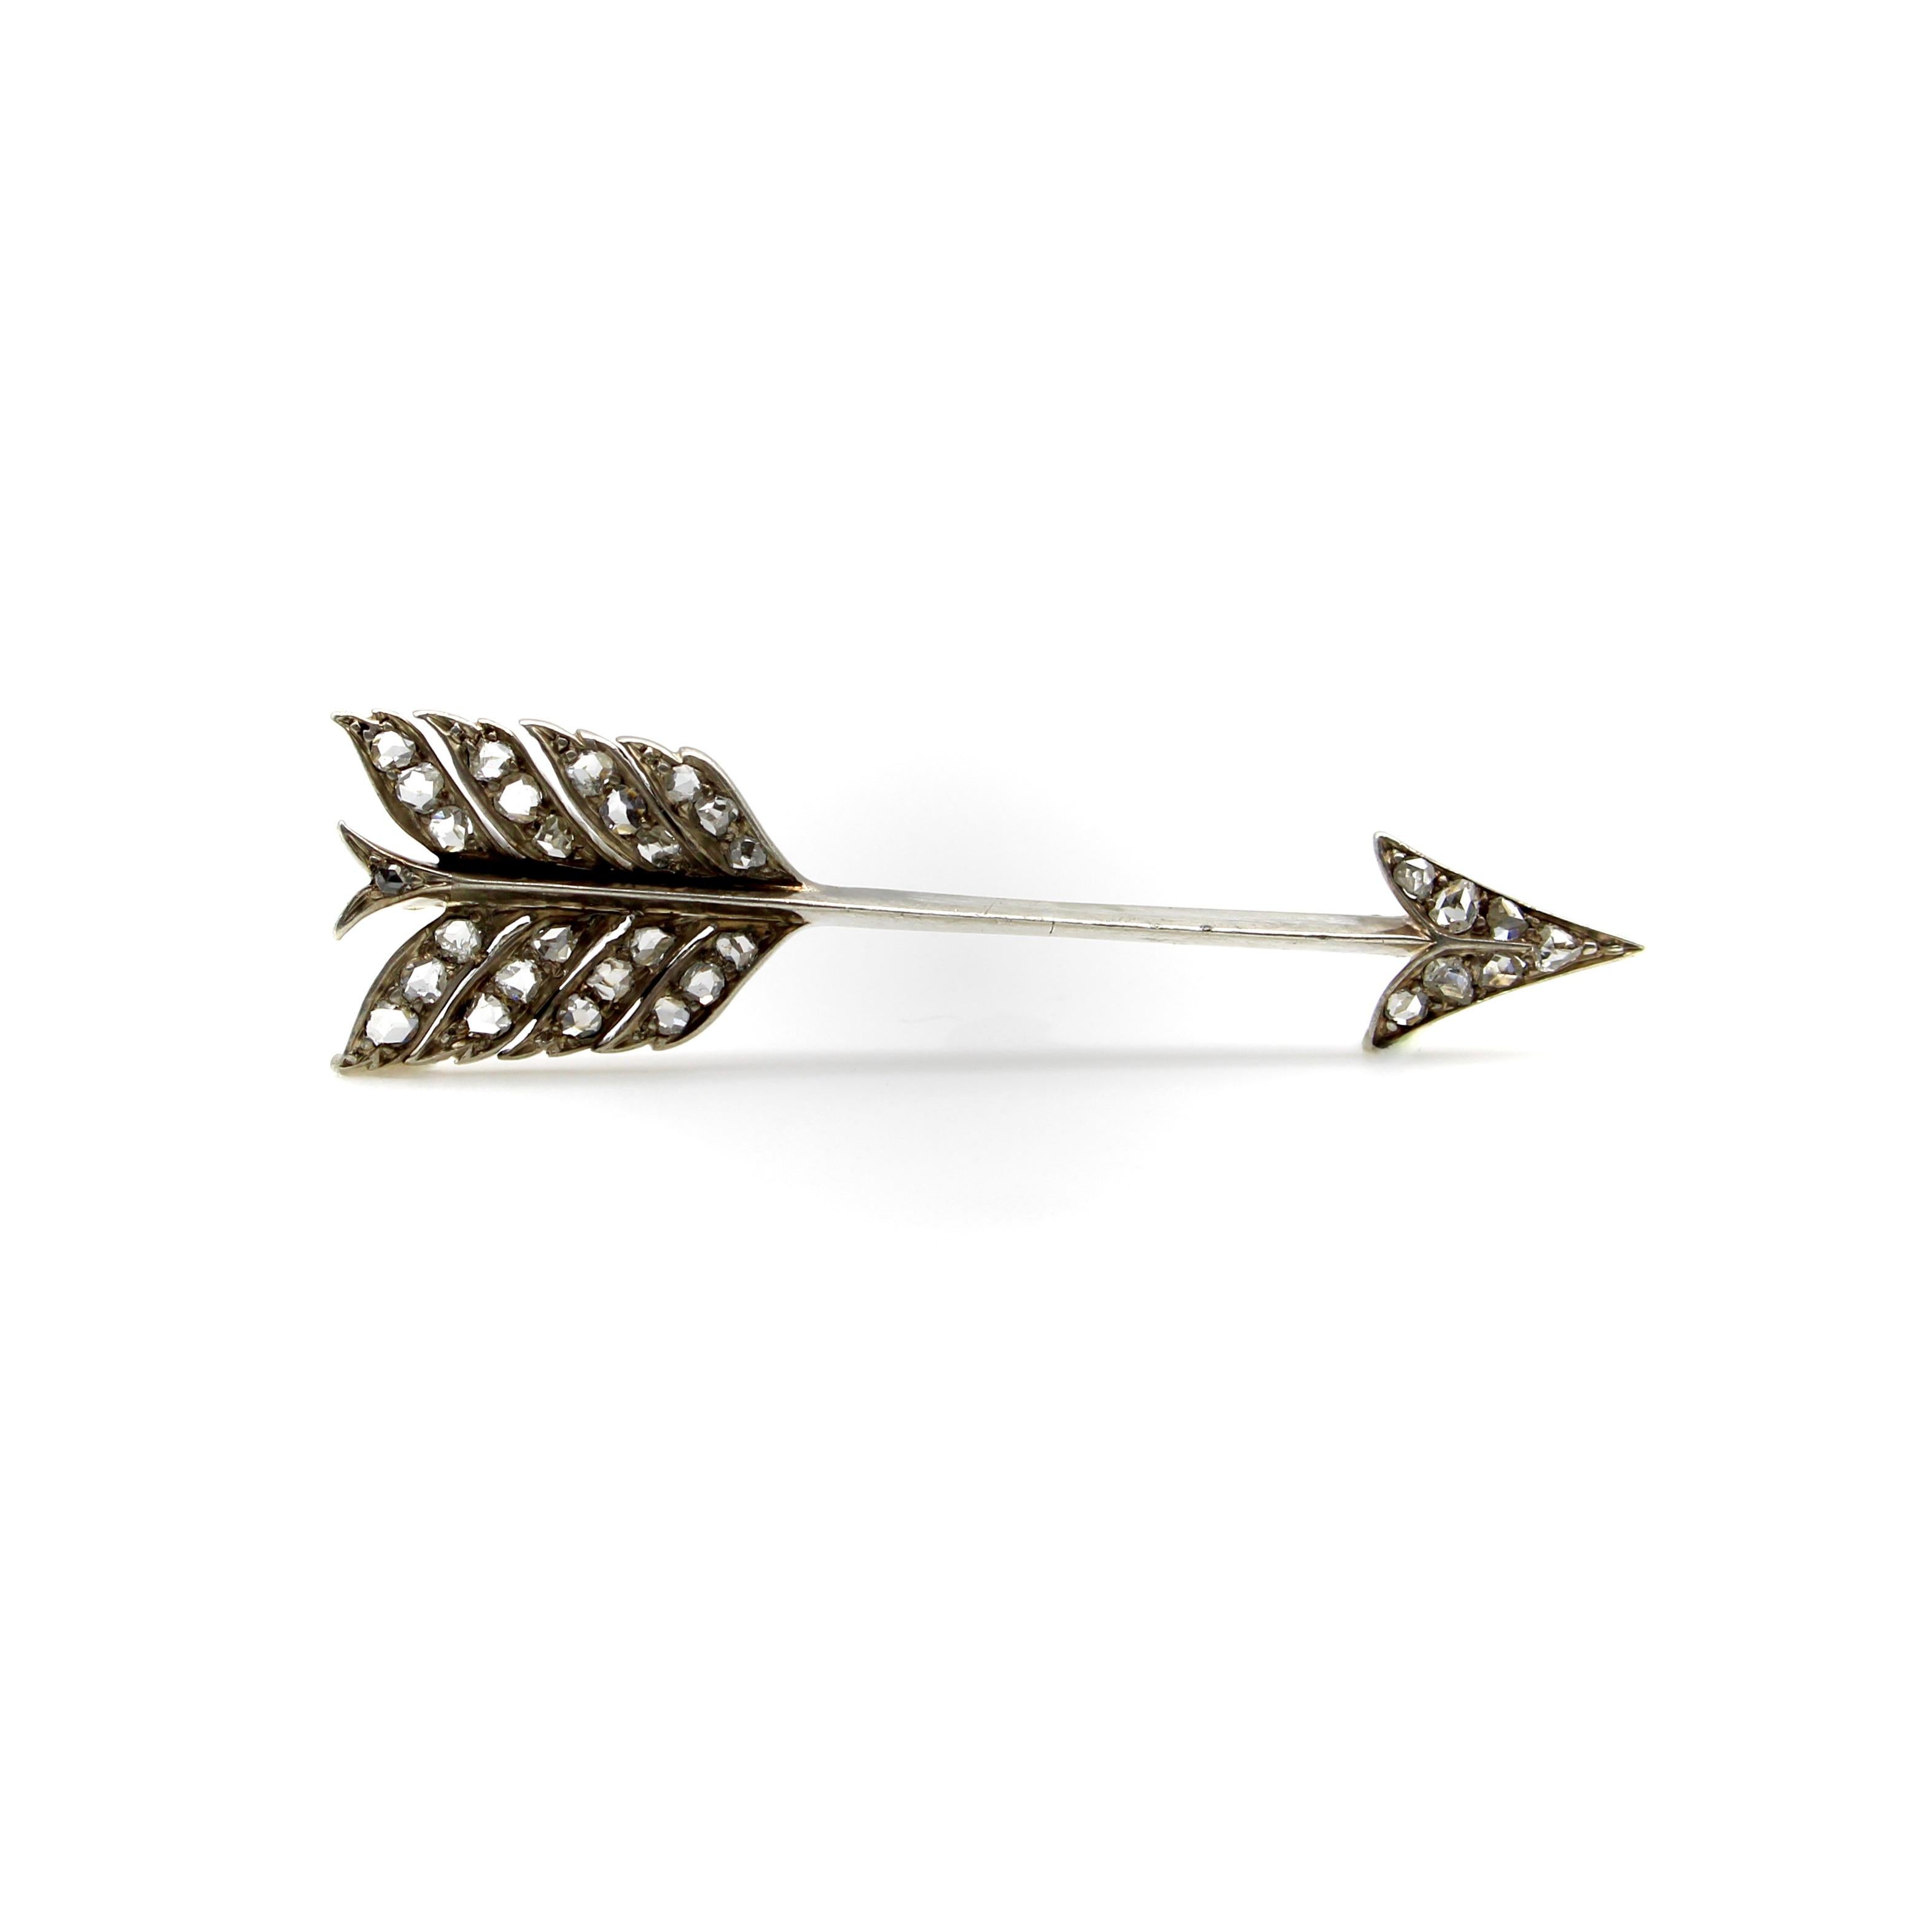 Circa the 1870’s, this diamond encrusted arrow has been converted from a pin into a pendant that can be worn in a variety of ways. The arrow contains 32 natural Rose Cut diamonds that vary in shape and size, from round to oblong. Each diamond